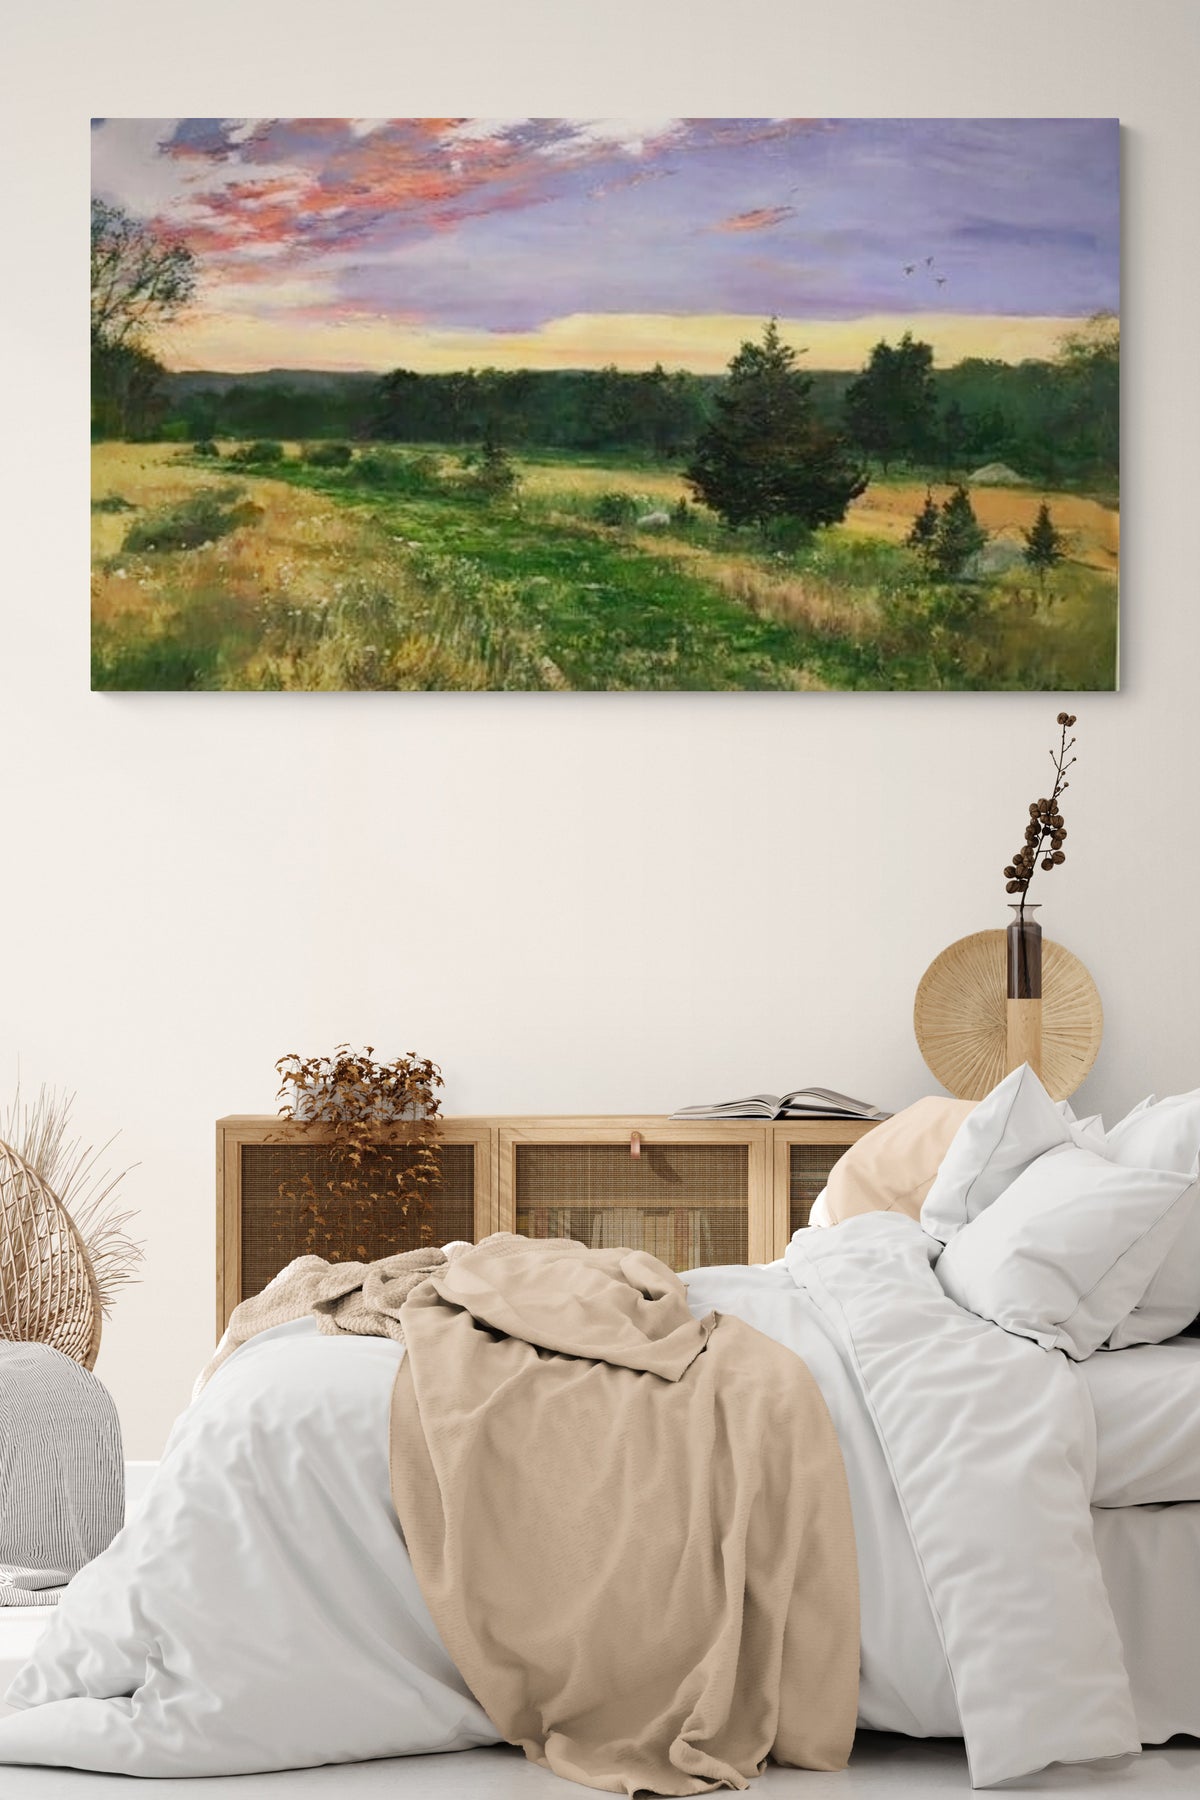 Contemporary Landscape Painting adds nature, sky & sunset to this natural bedroom